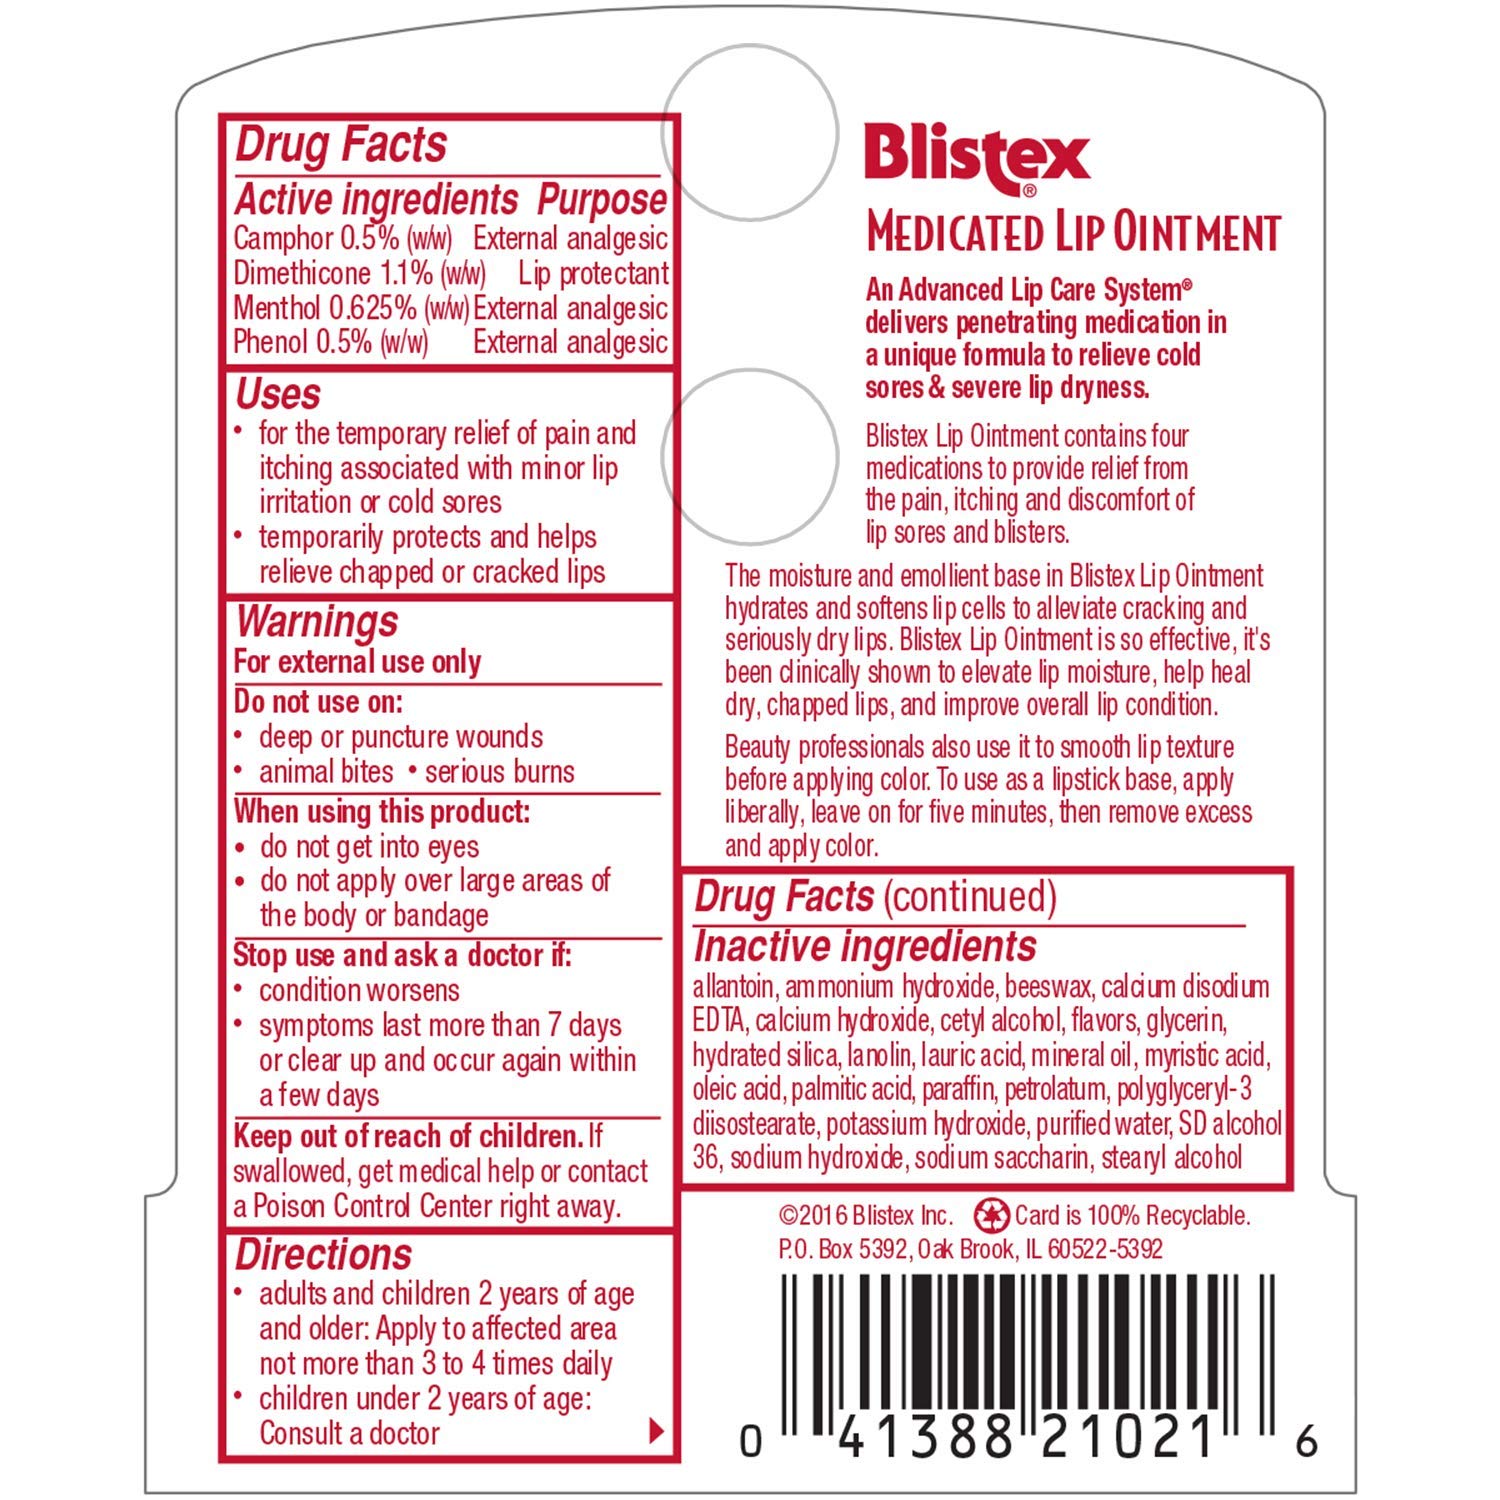 Blistex Medicated Lip Ointment for Dryness and Cold Sores, 0.21oz - PACK OF 2